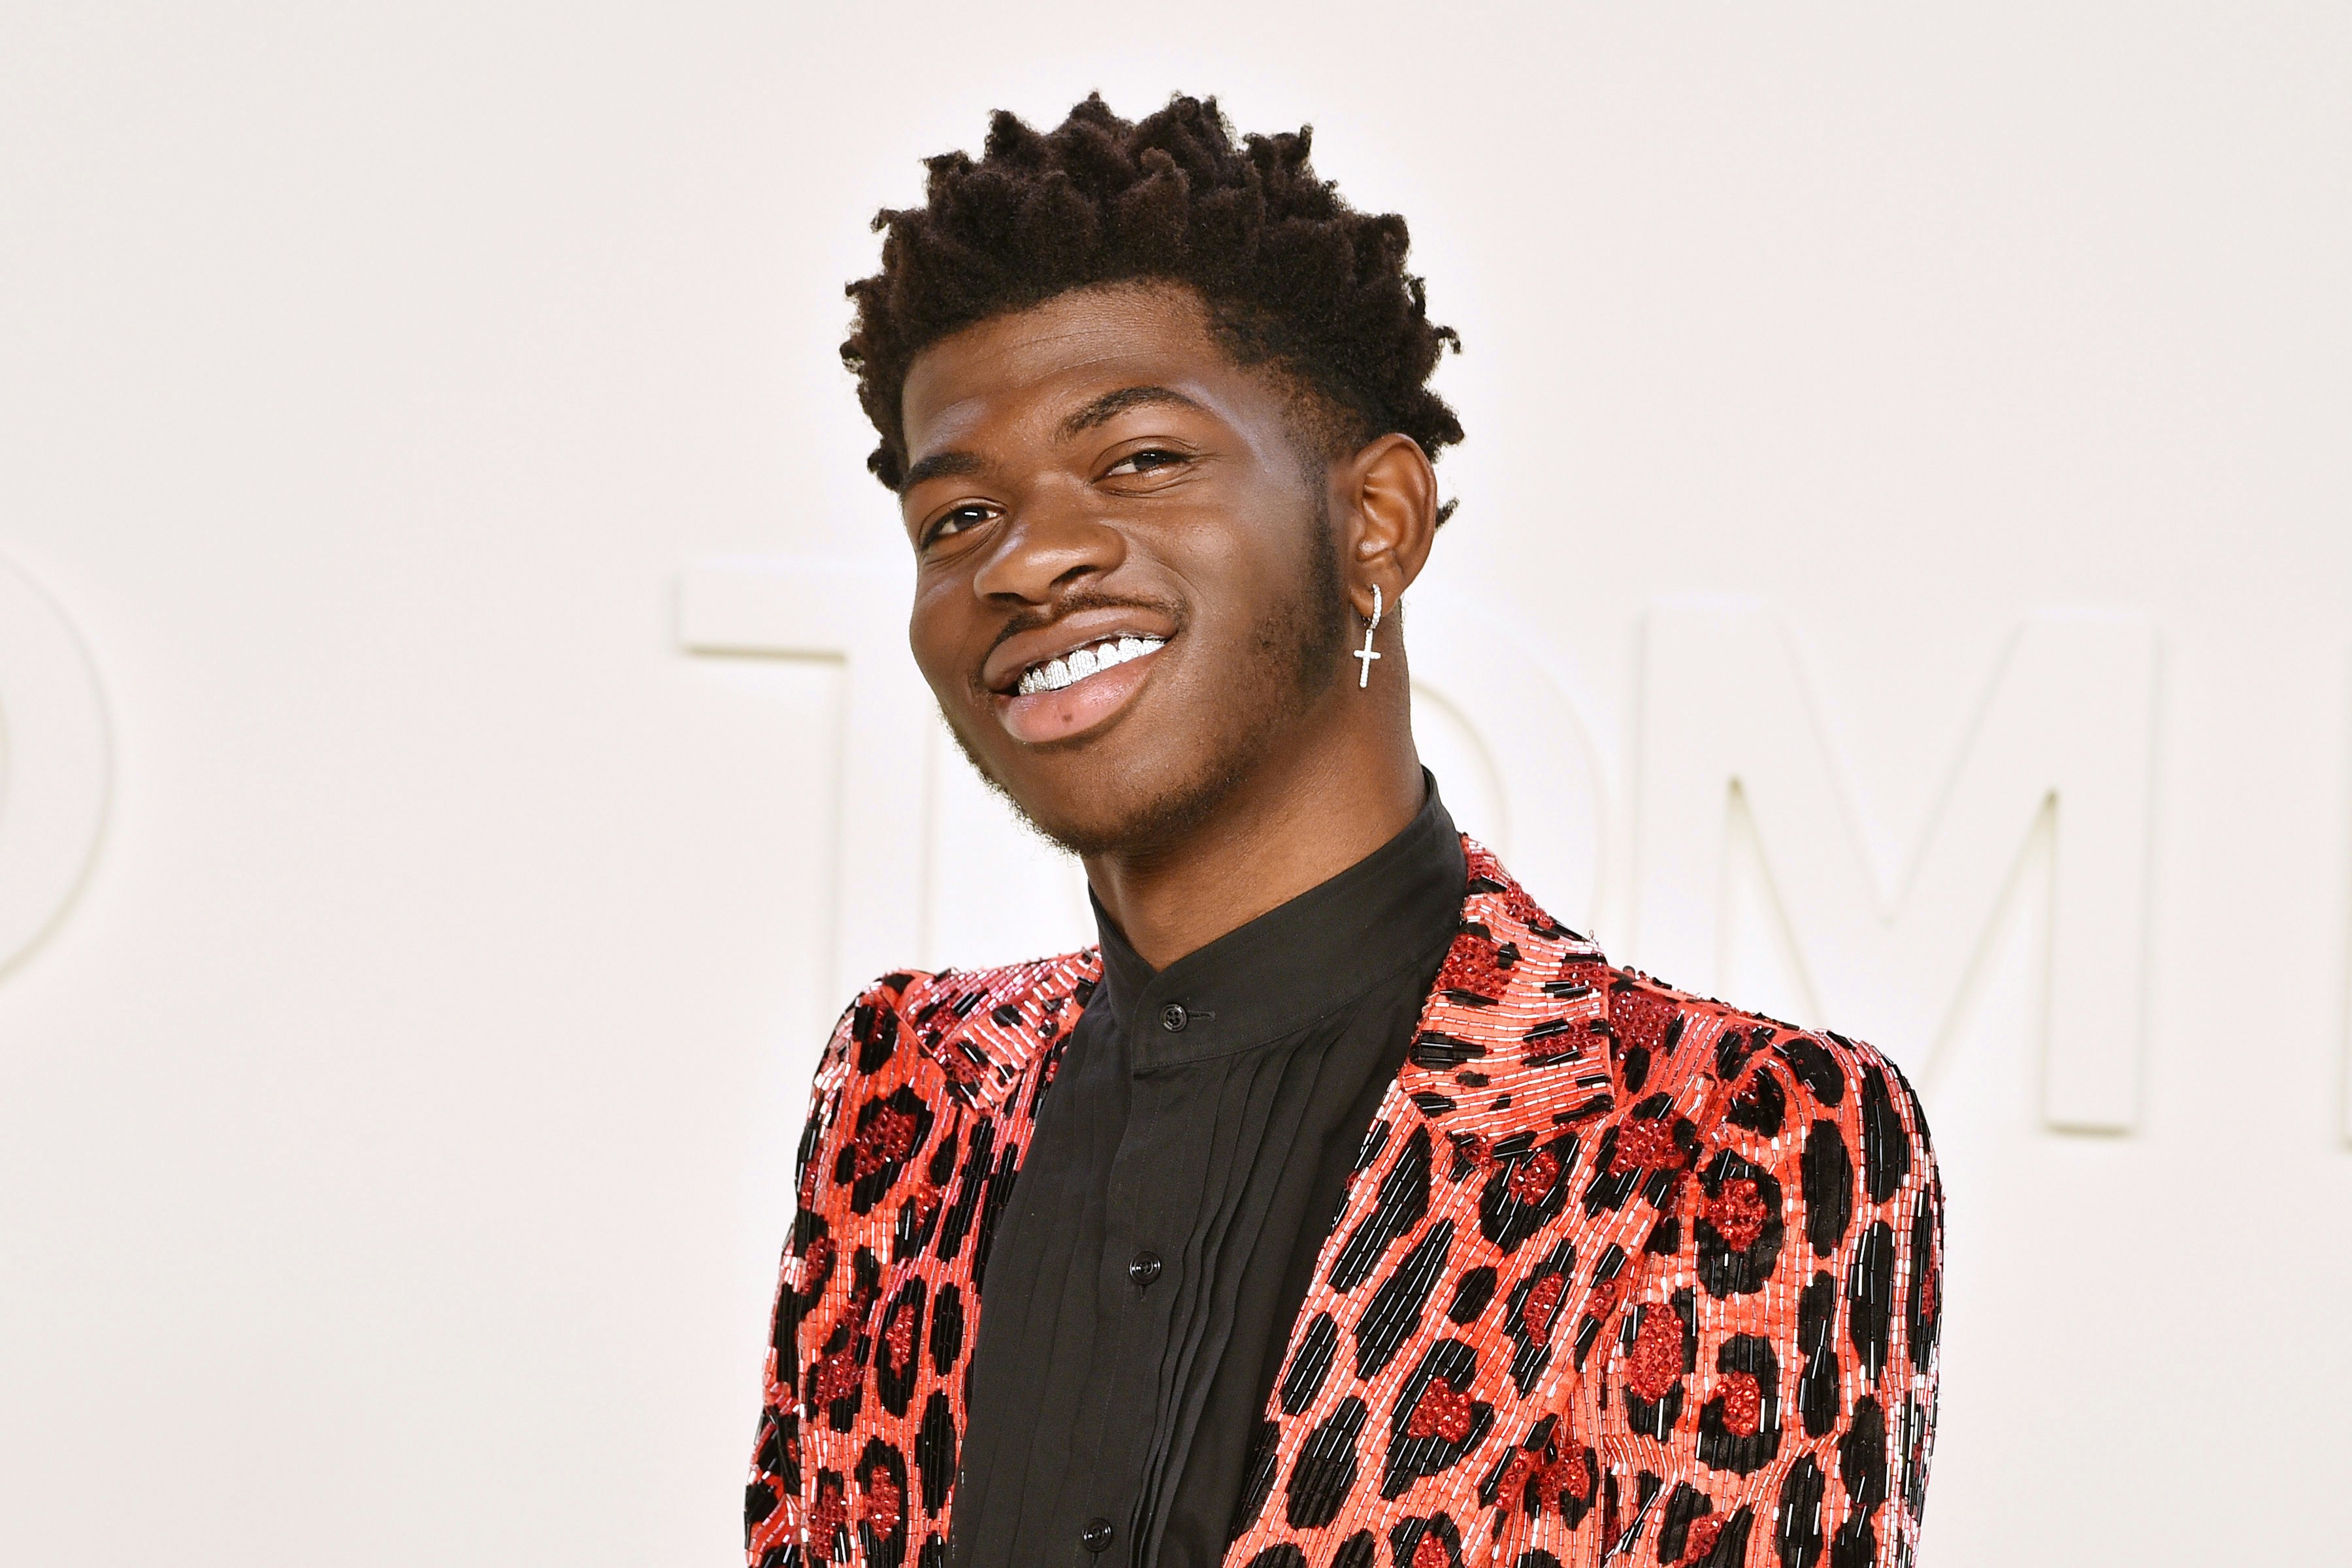 lil nas x gay or not